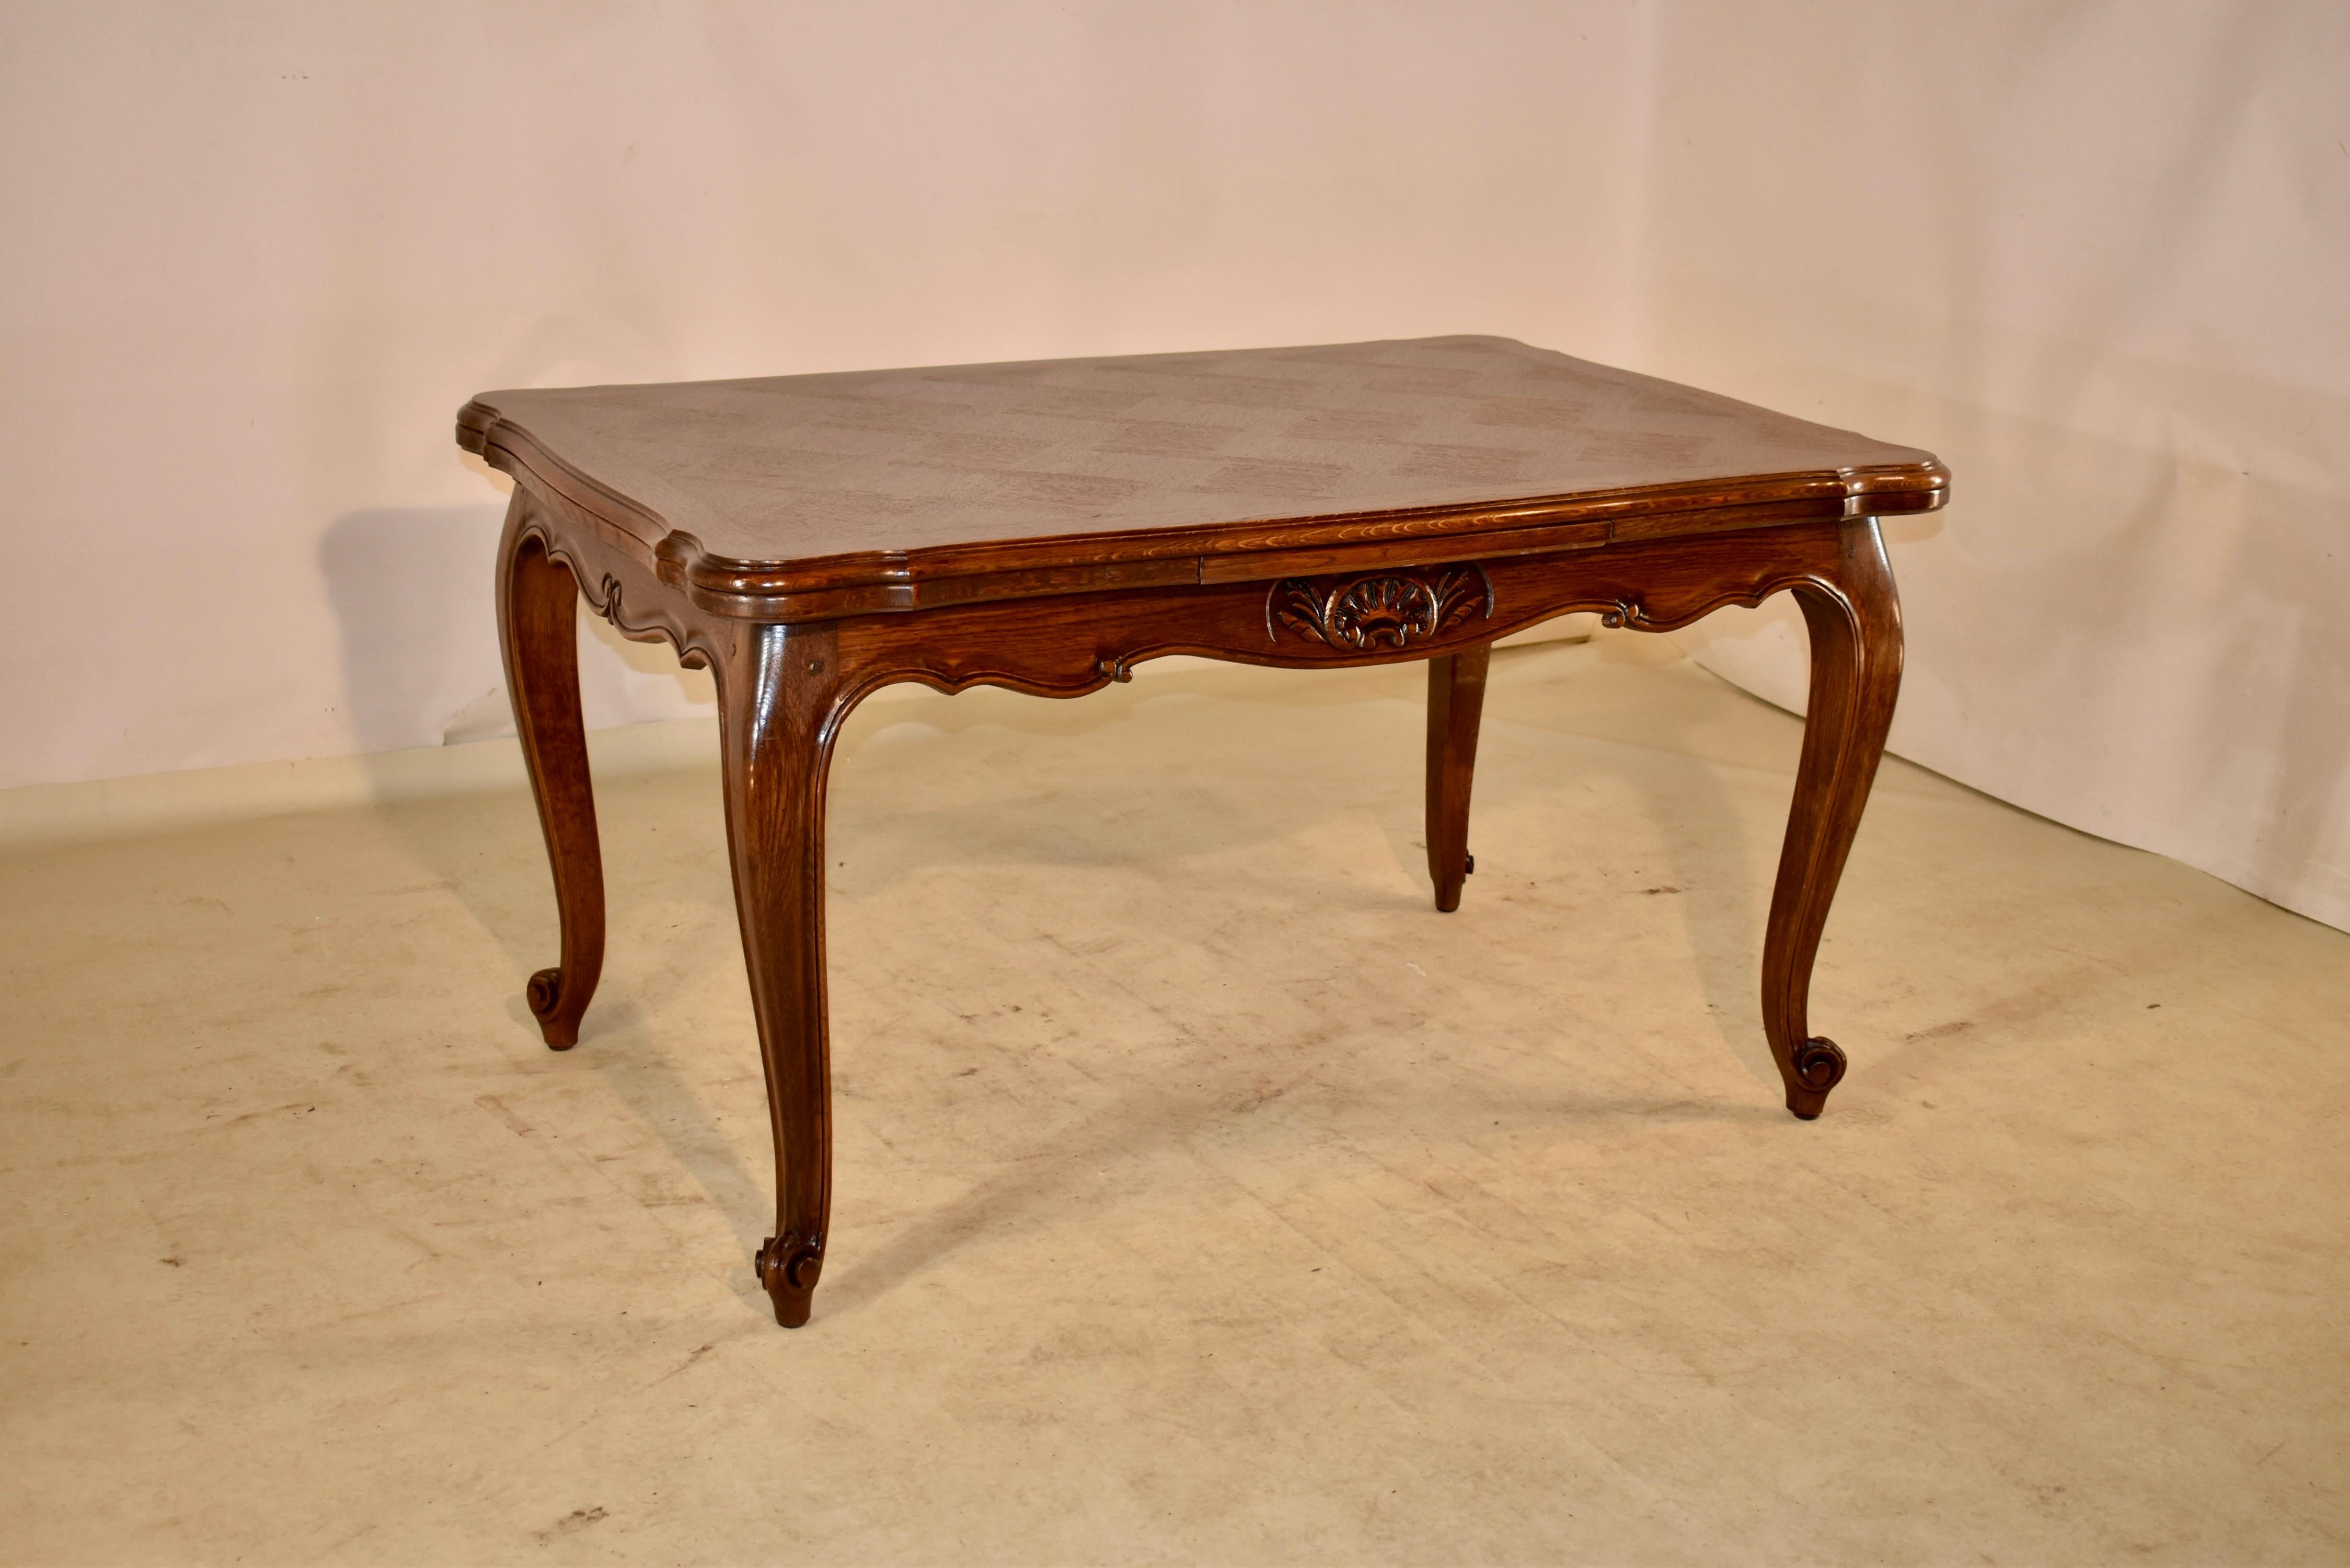 Circa 1910 French draw leaf table made from oak with a banded and parqueted top and two extending leaves, following down to a hand scalloped and carved decorated apron and supported on hand carved cabriole legs with carved shell decorations on the